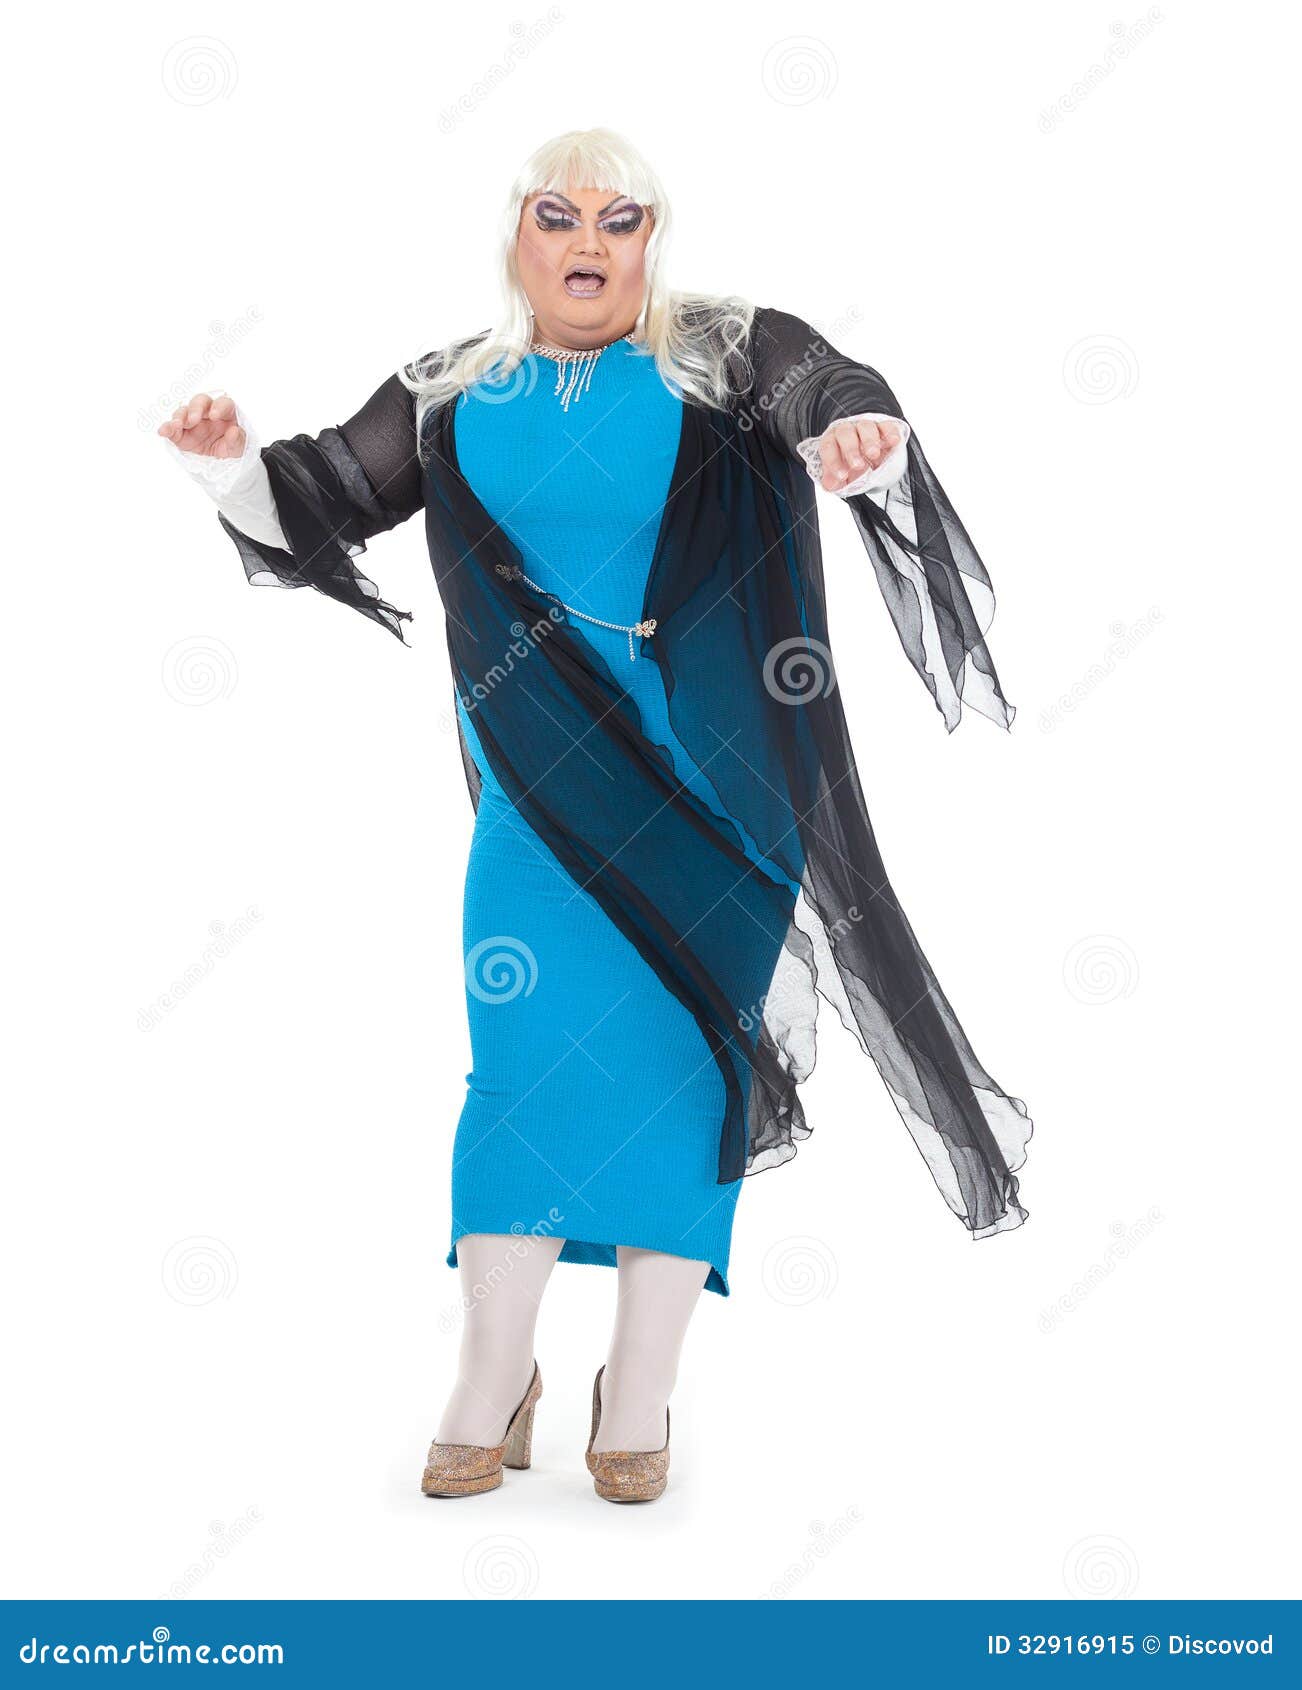 Drag Queen Dressed As a Female Singer Stock Image - Image of animated ...